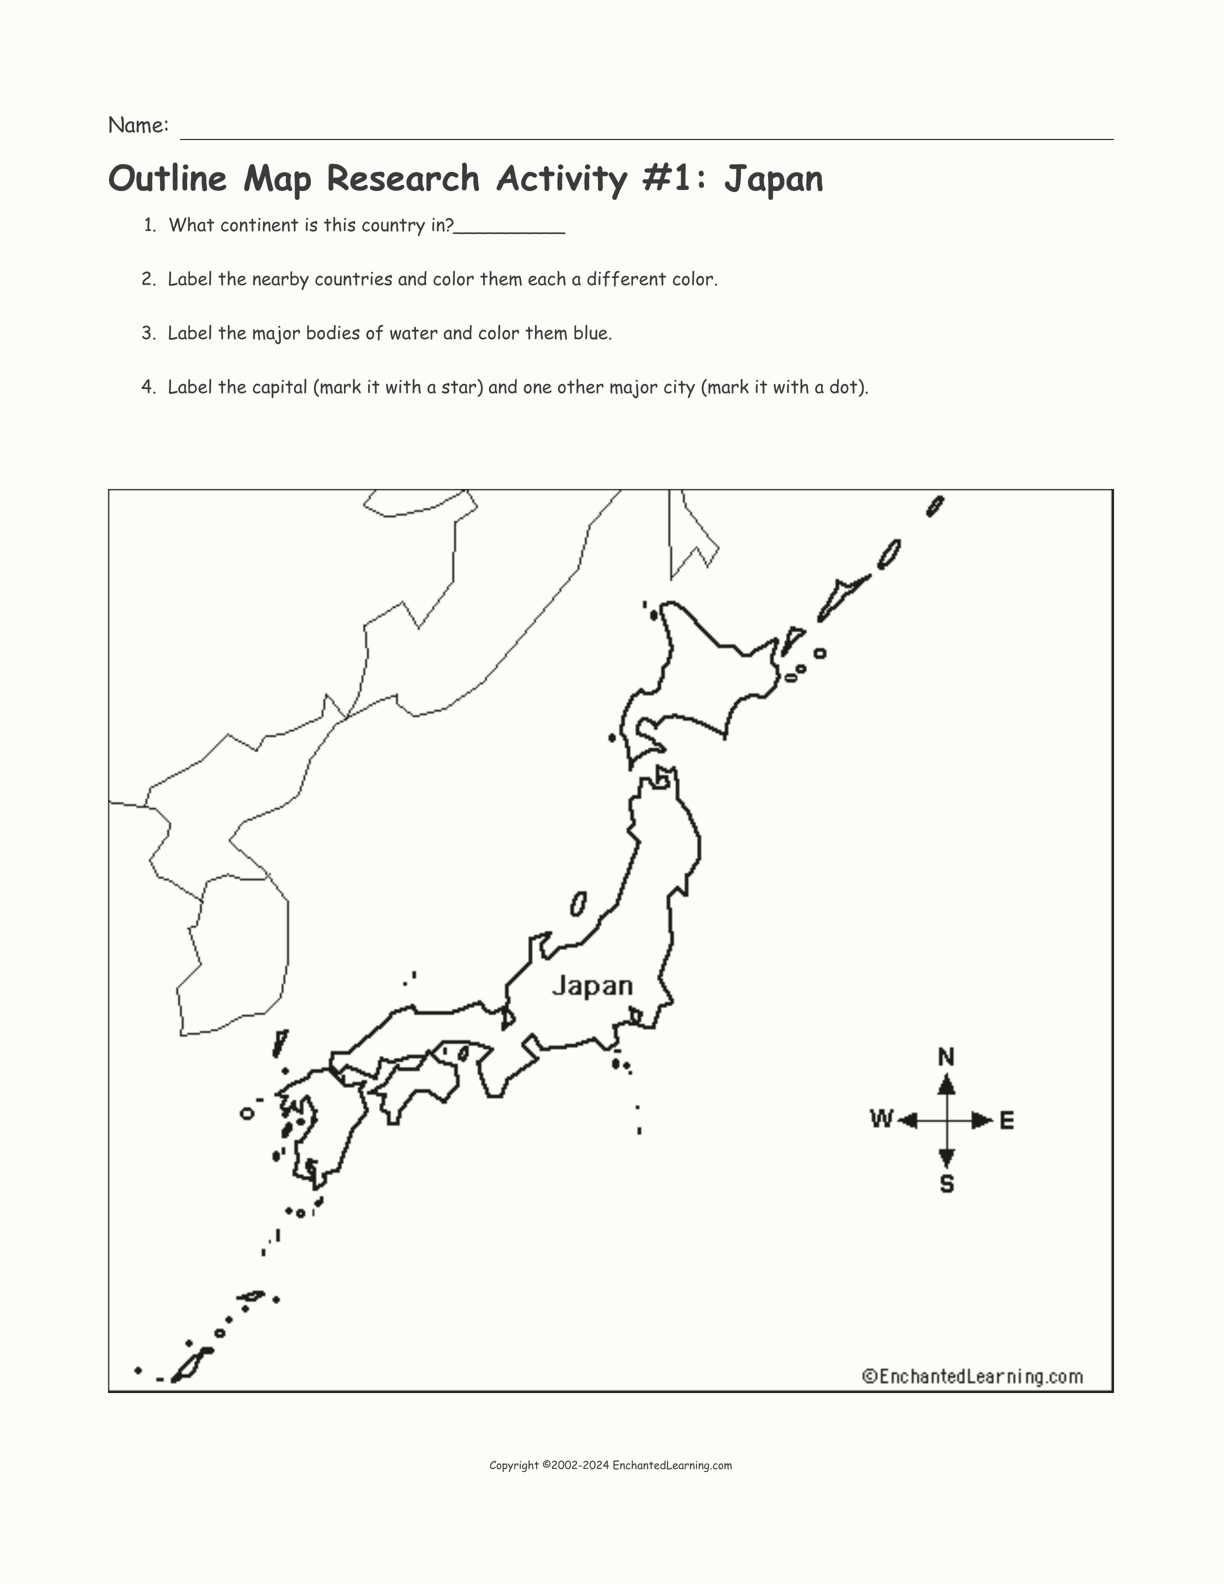 Outline Map Research Activity #1: Japan interactive printout page 1